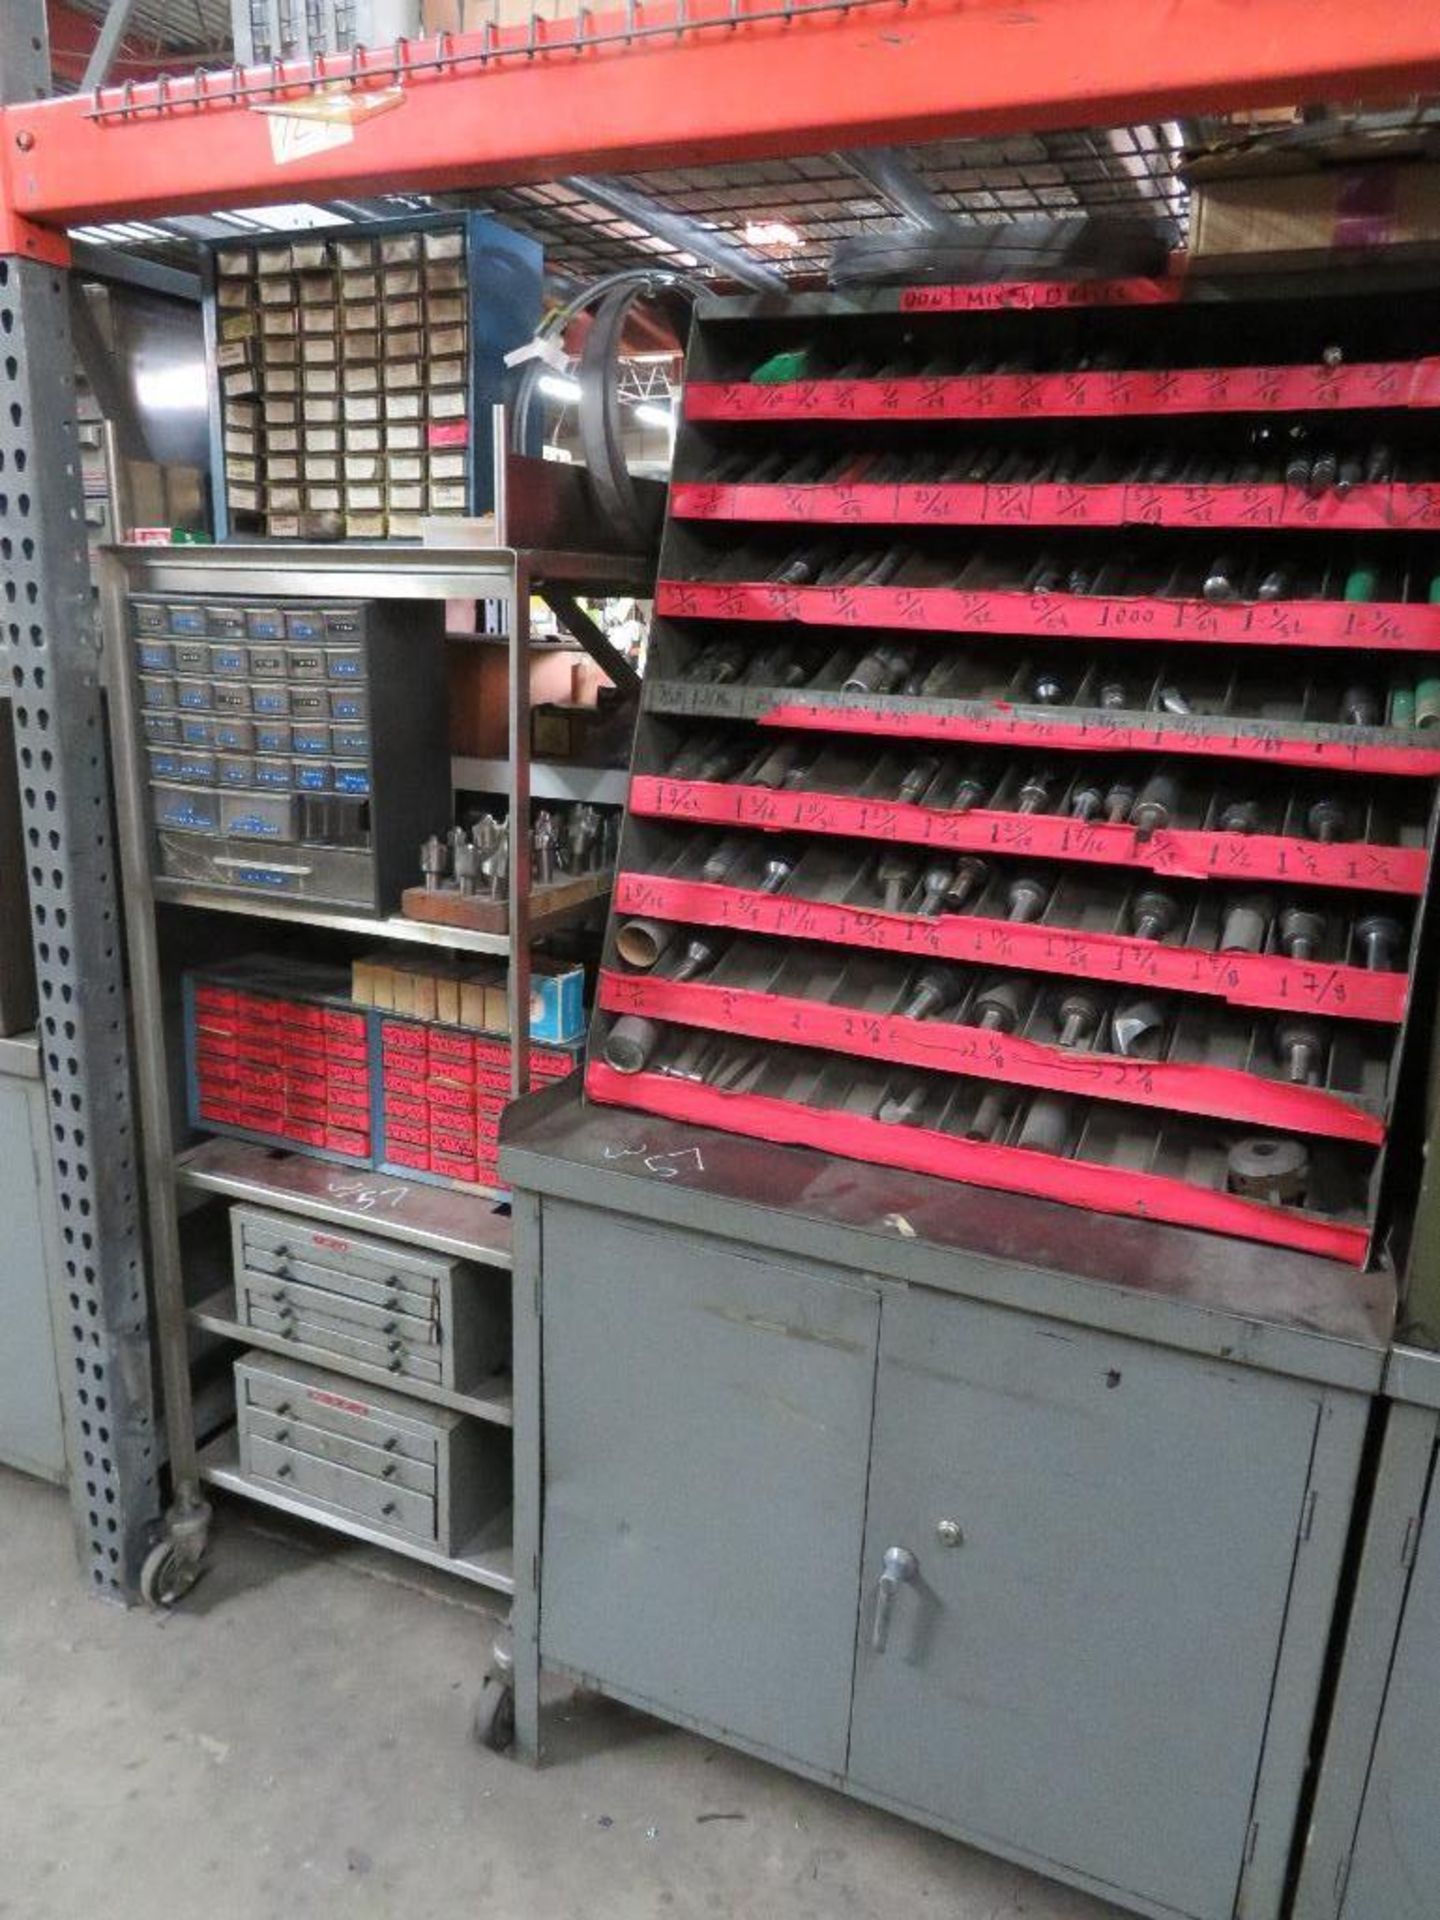 LOT: Steel Cabinets with Contents of Assorted Drill Bits, Punches, Countersinks, Taps, Hardware - Image 4 of 4